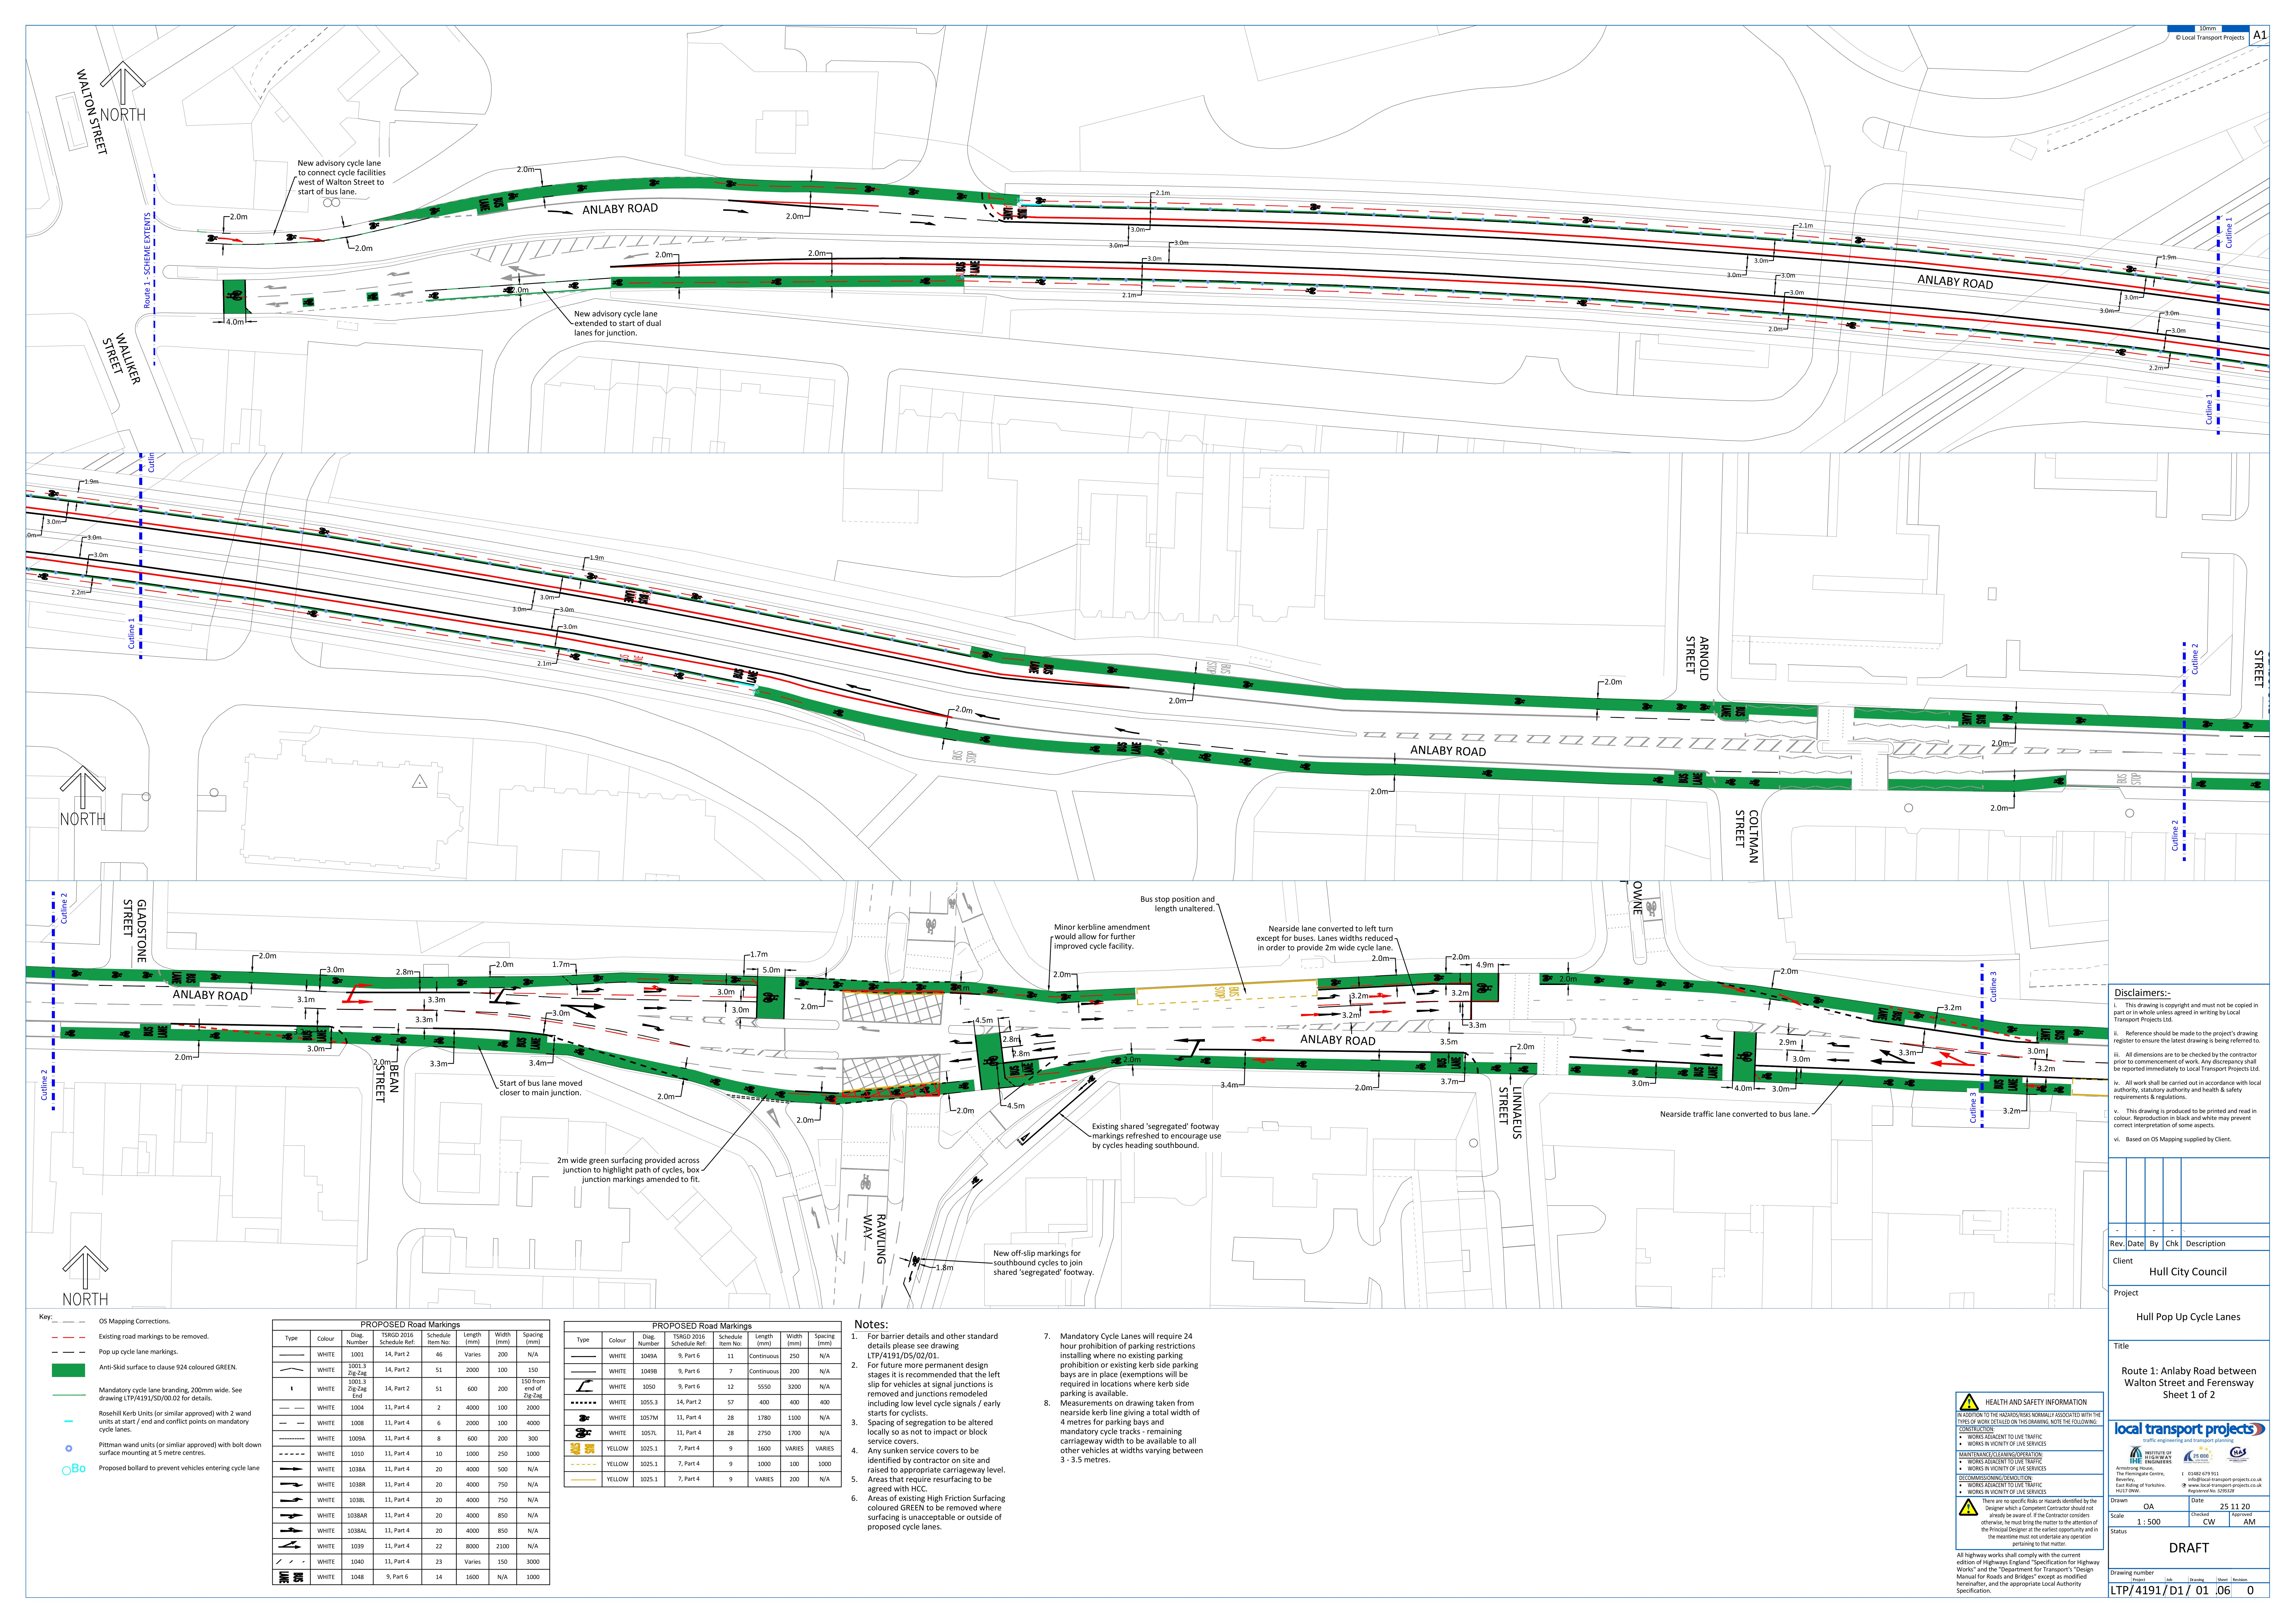 Anlaby Rd. between Walton St. and Ferensway (1 of 2) - Plan Drawing (PDF) - Click image to view full size